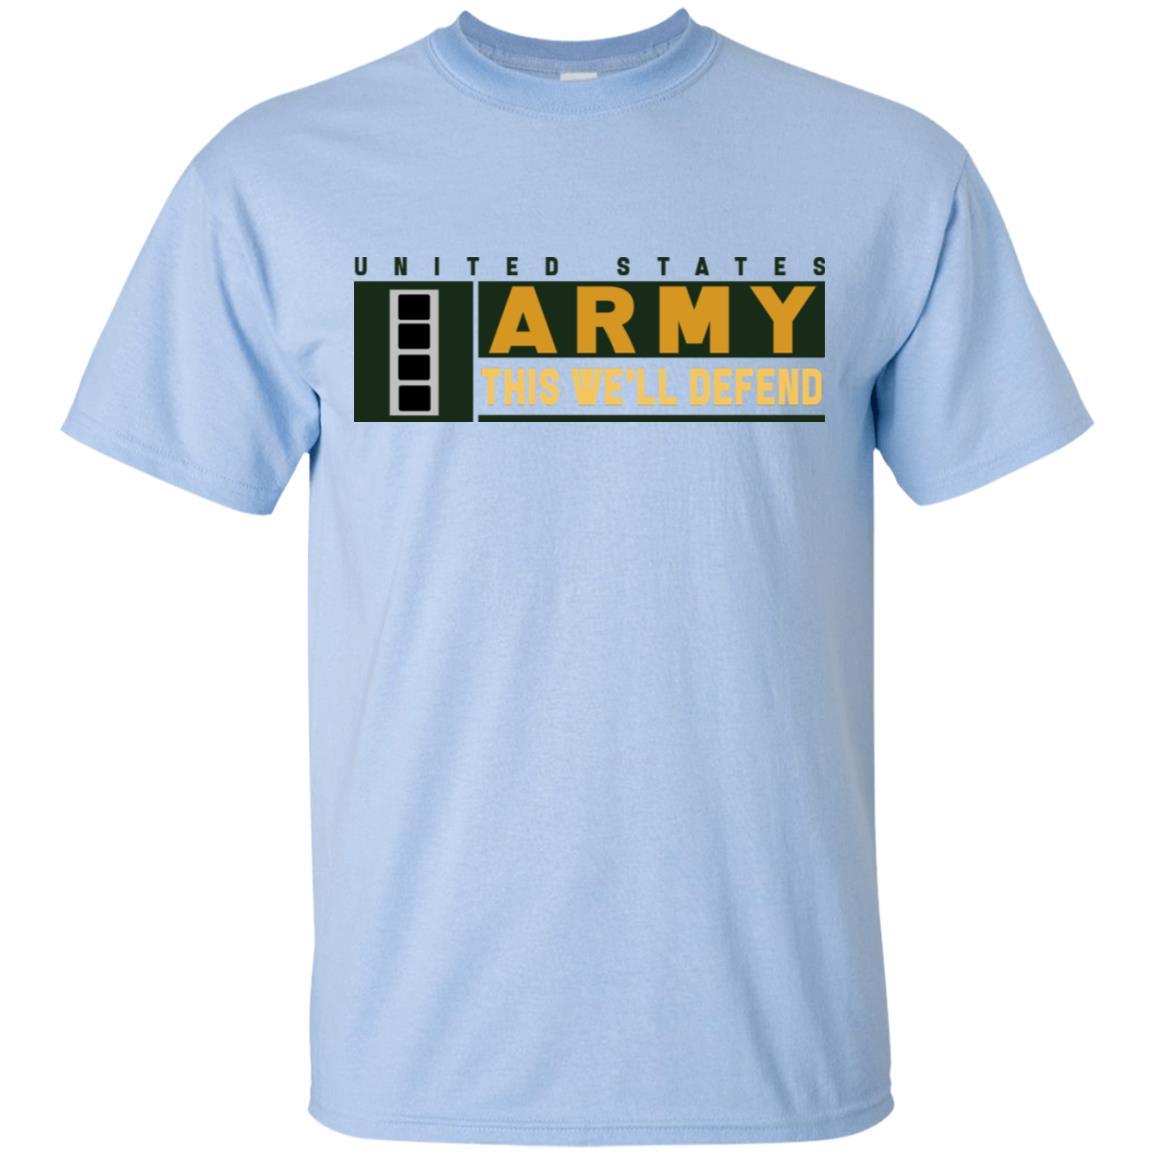 US Army W-4 This We Will Defend T-Shirt On Front For Men-TShirt-Army-Veterans Nation